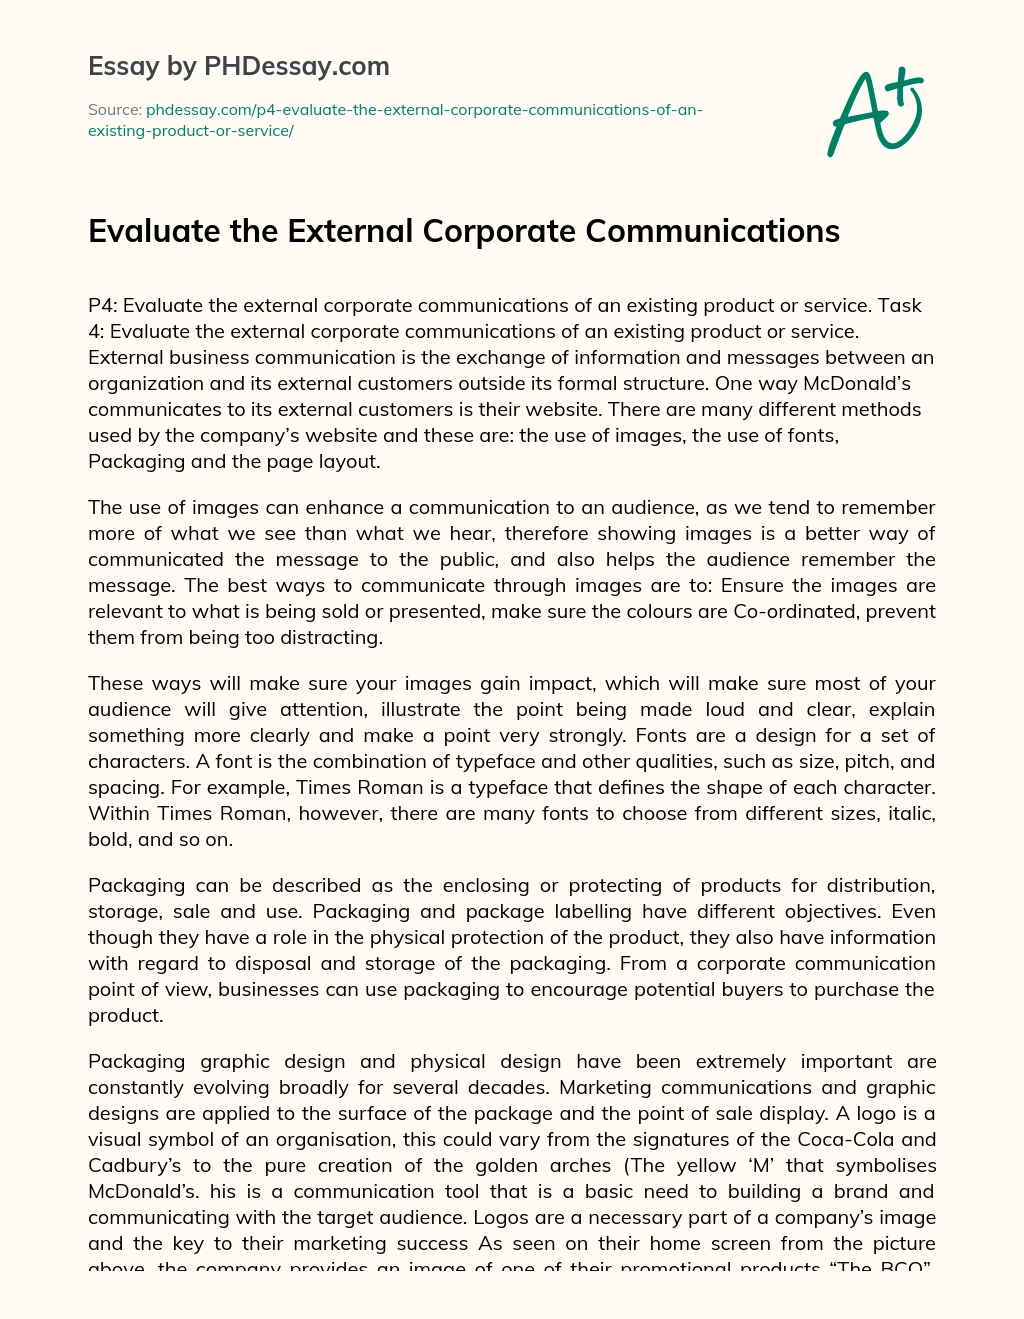 Evaluate the External Corporate Communications essay